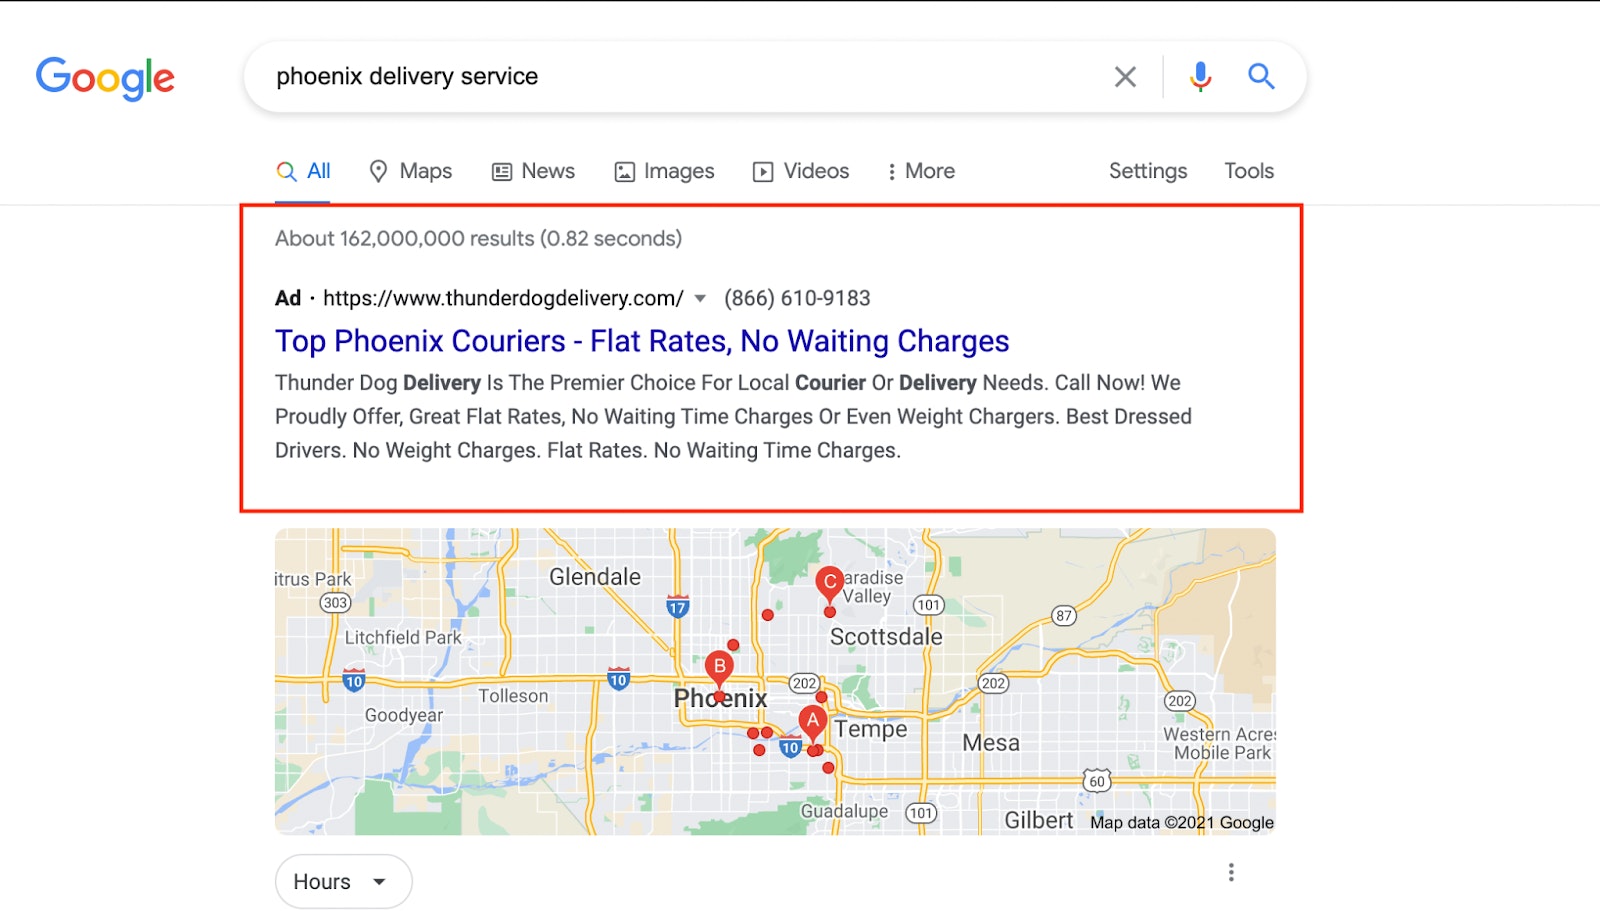 Screenshot of 'phoenix delivery service' Google search with an Ad as the first listing